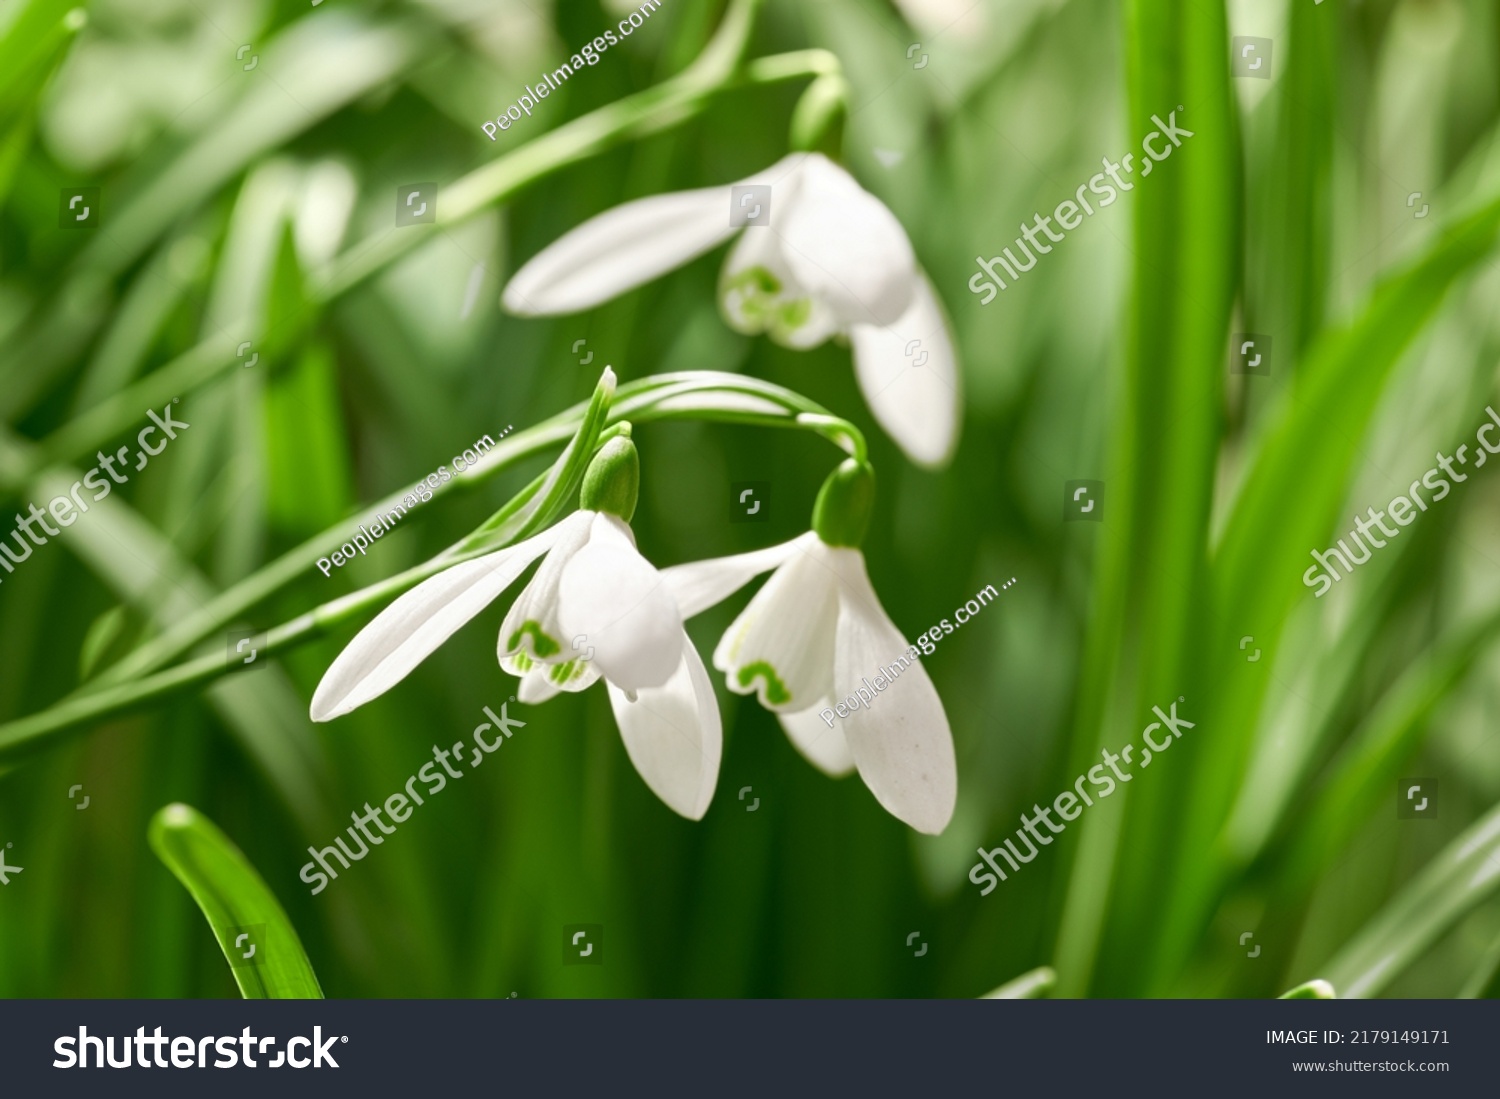 Closeup of snowdrop flowers blossoming in a meadow against blurred green background. Delicate white blooms growing in a garden or forest in spring. Galanthus nivalis stems and leaves with copy space #2179149171